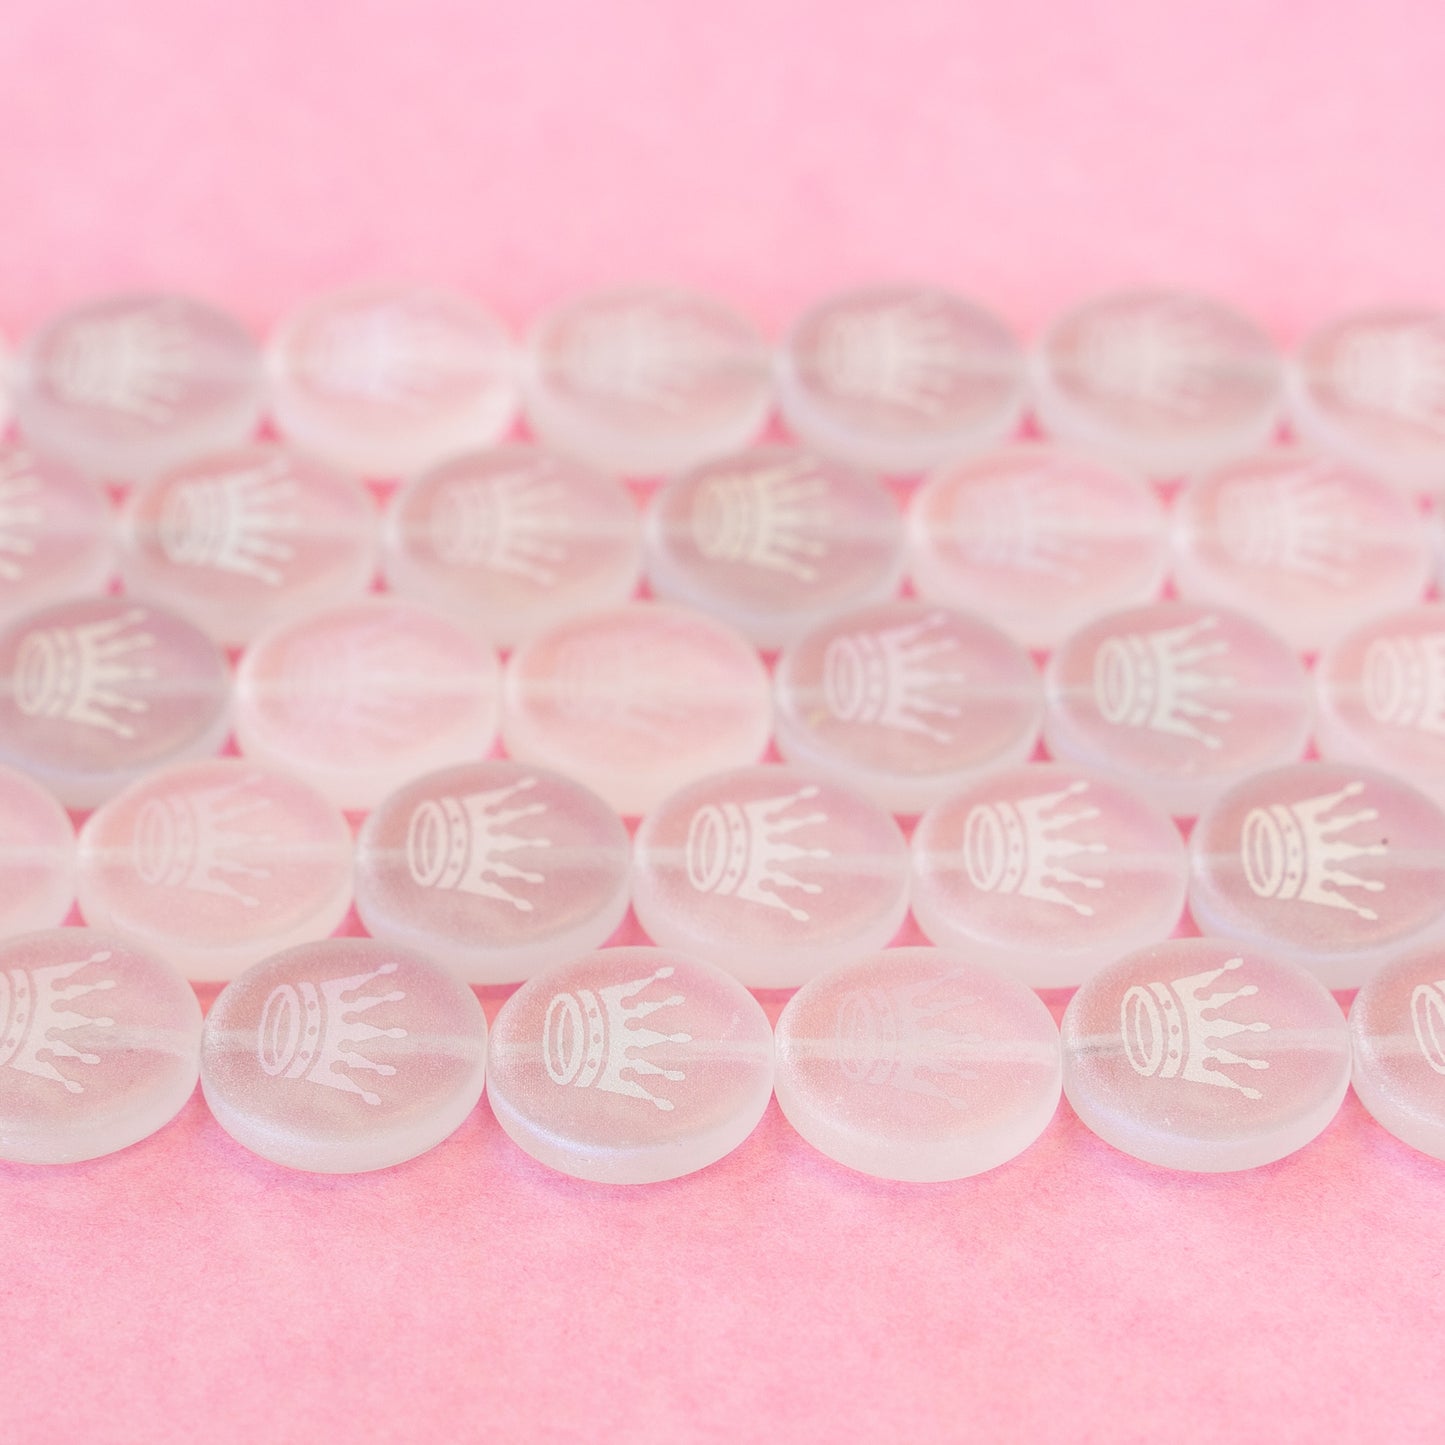 14mm Crown Beads - Crystal Matte AB - 8 beads